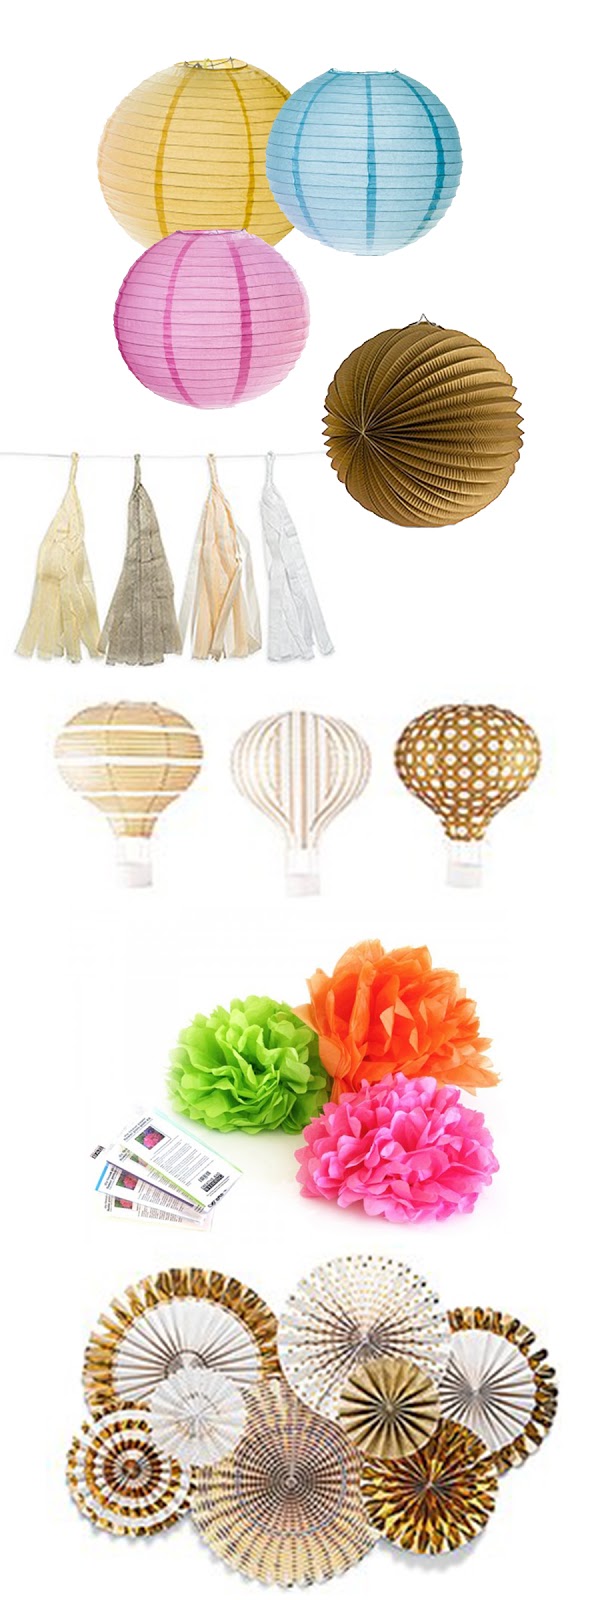 We love to party! Party decorating inspiration and supplies from Creative Bag.